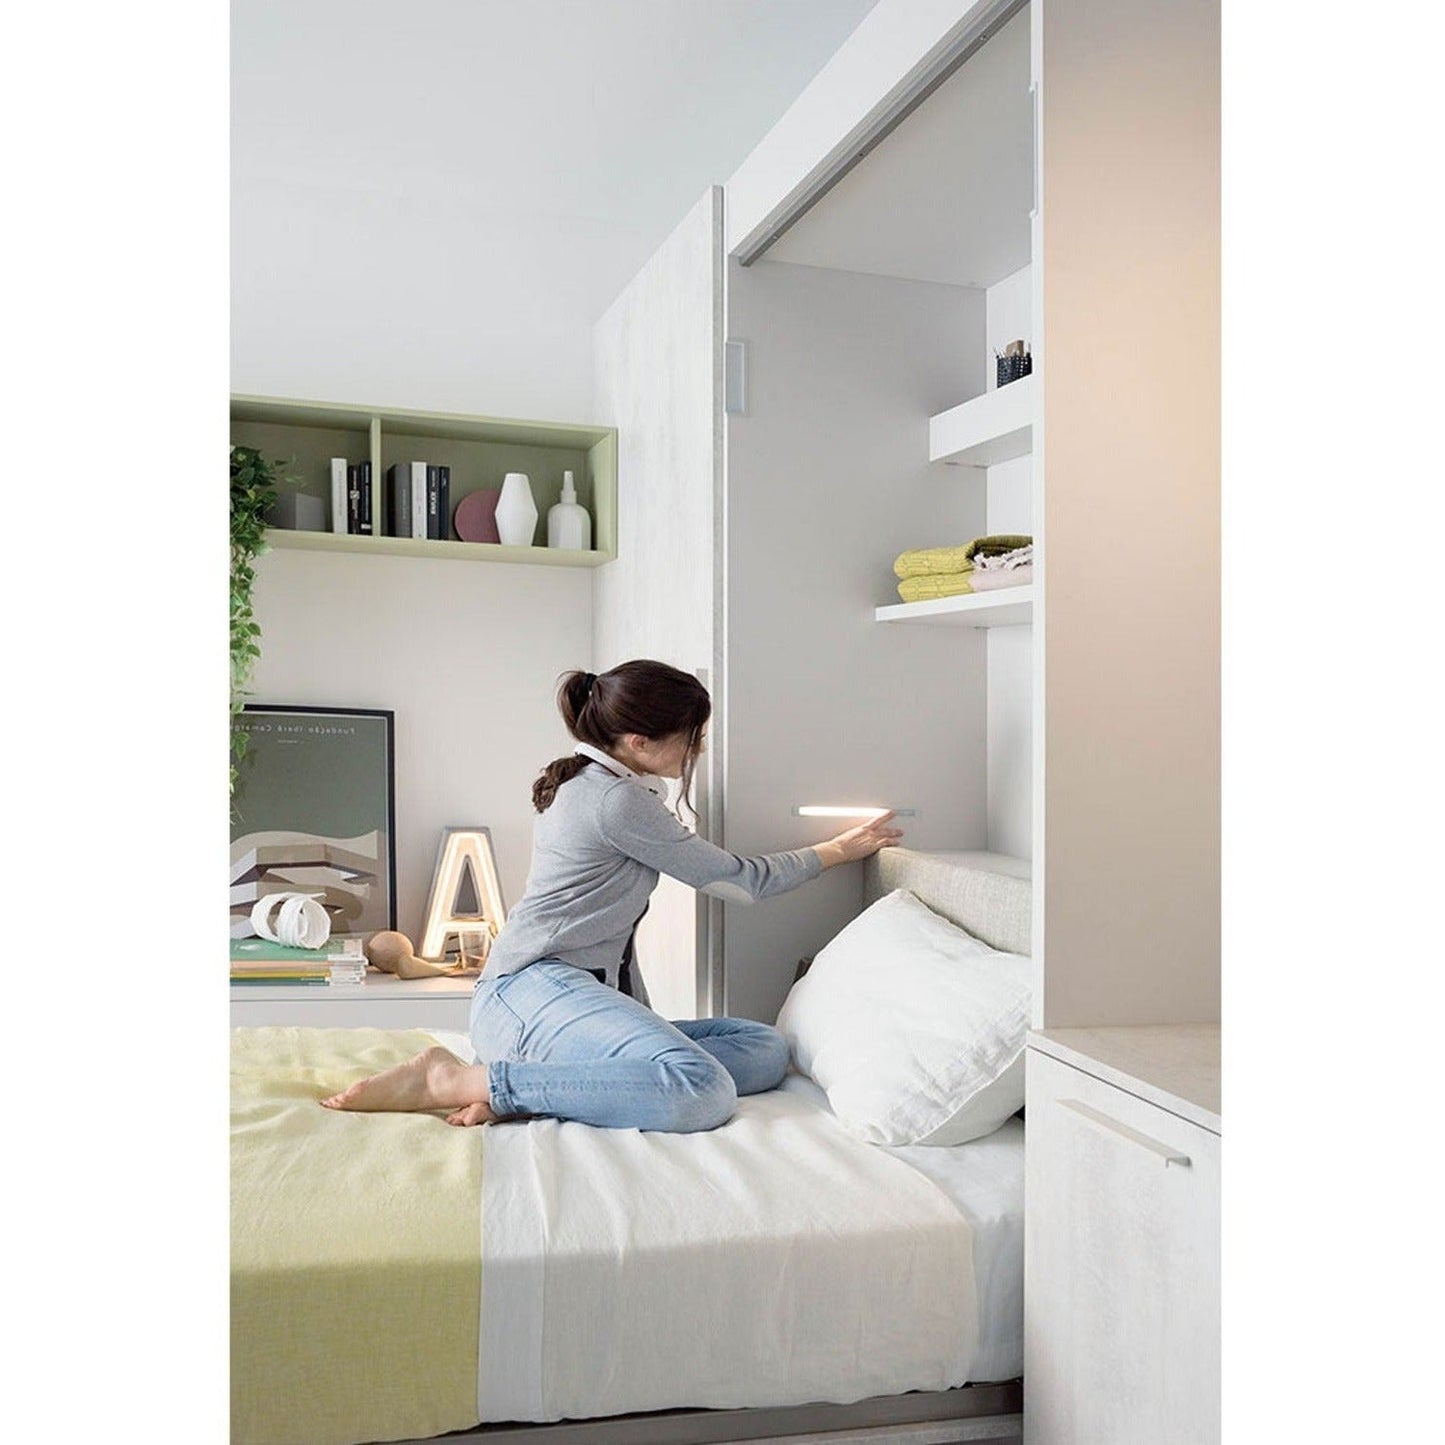 IM20-03 Foldaway Bed by Clever